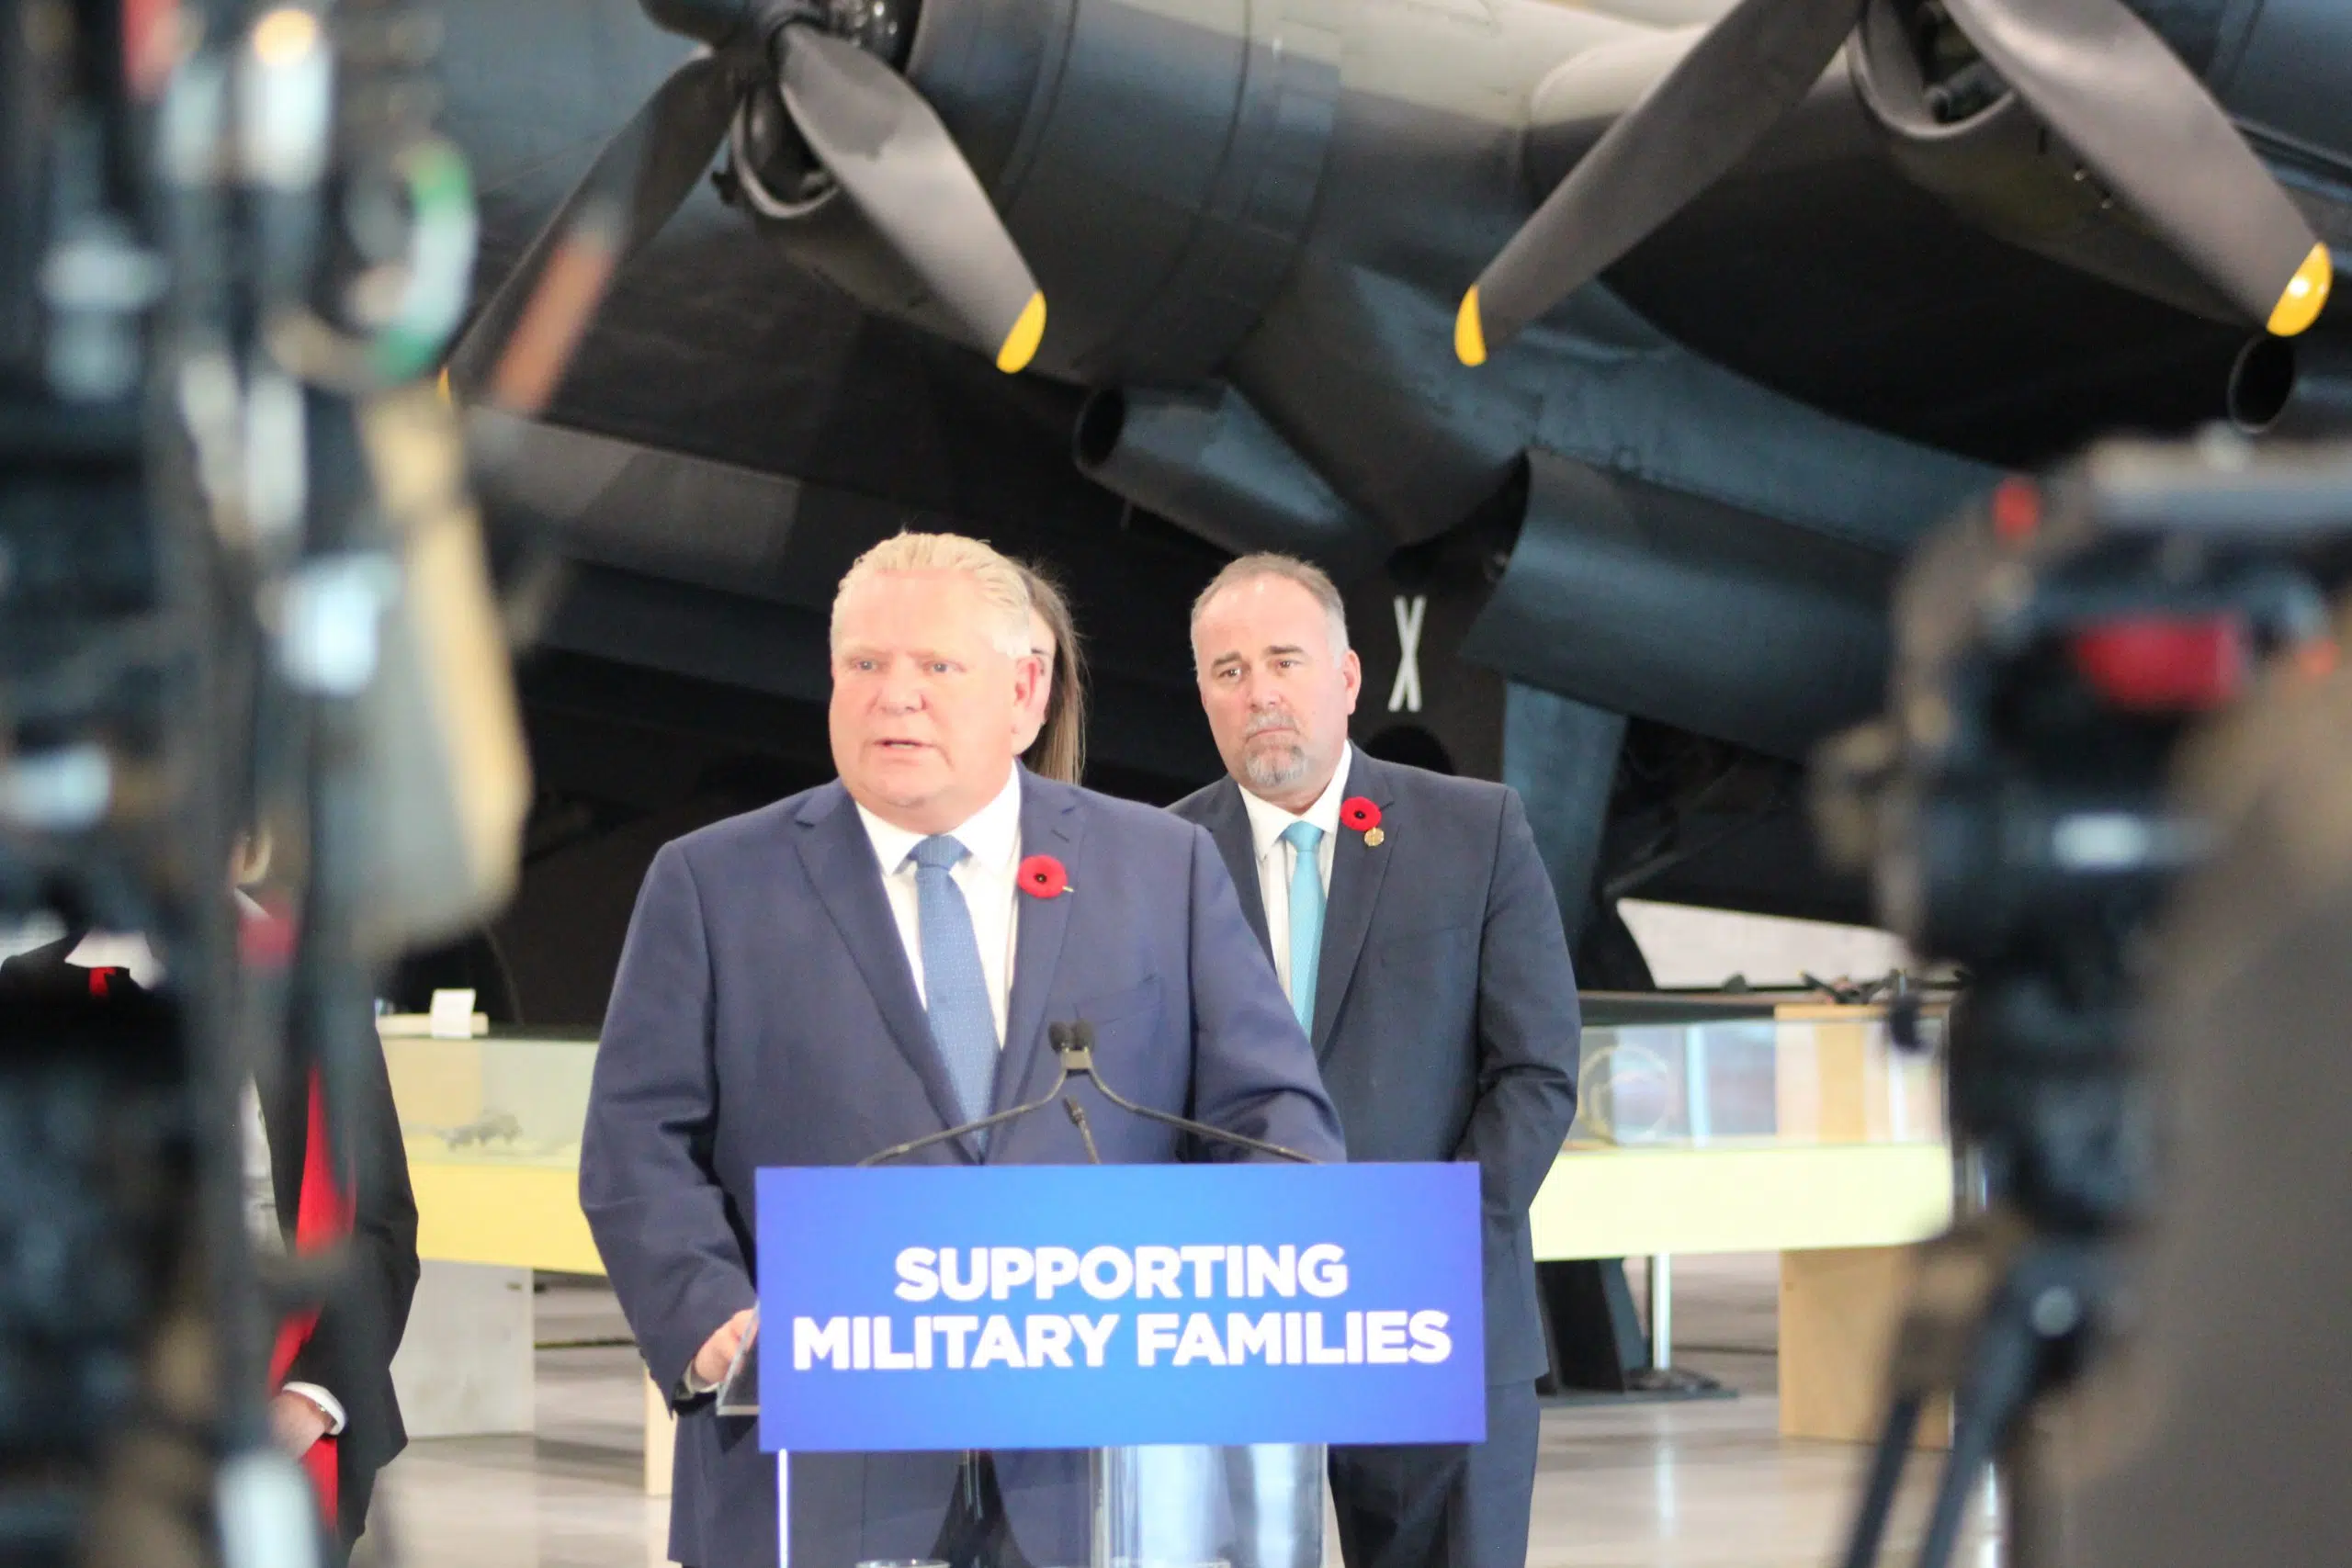 Ford makes military family hotline announcement at CFB Trenton